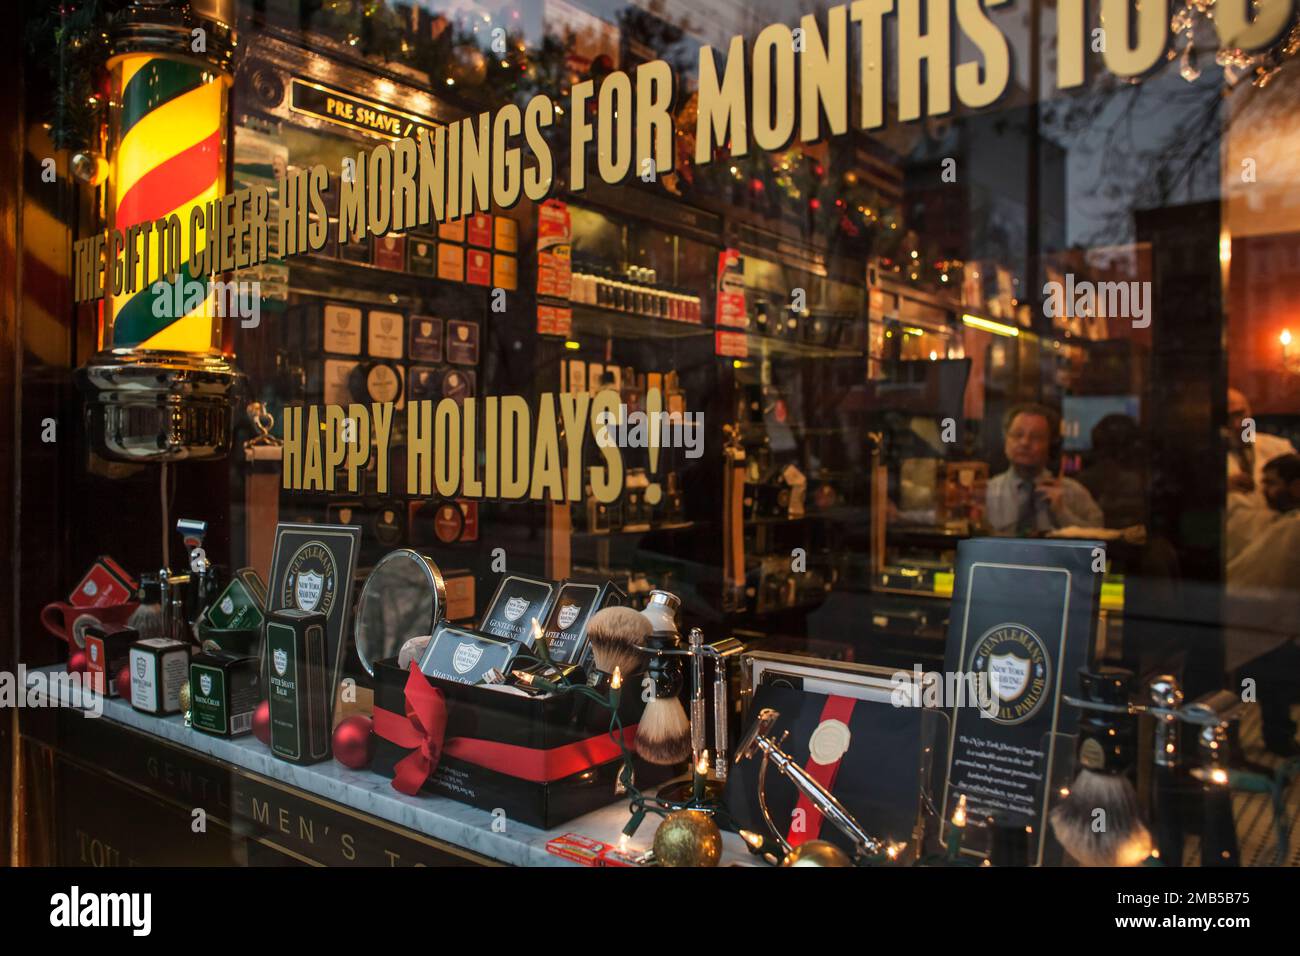 Christmas presents’ suggestions on a barbershop of the Lower East Side, New York Stock Photo